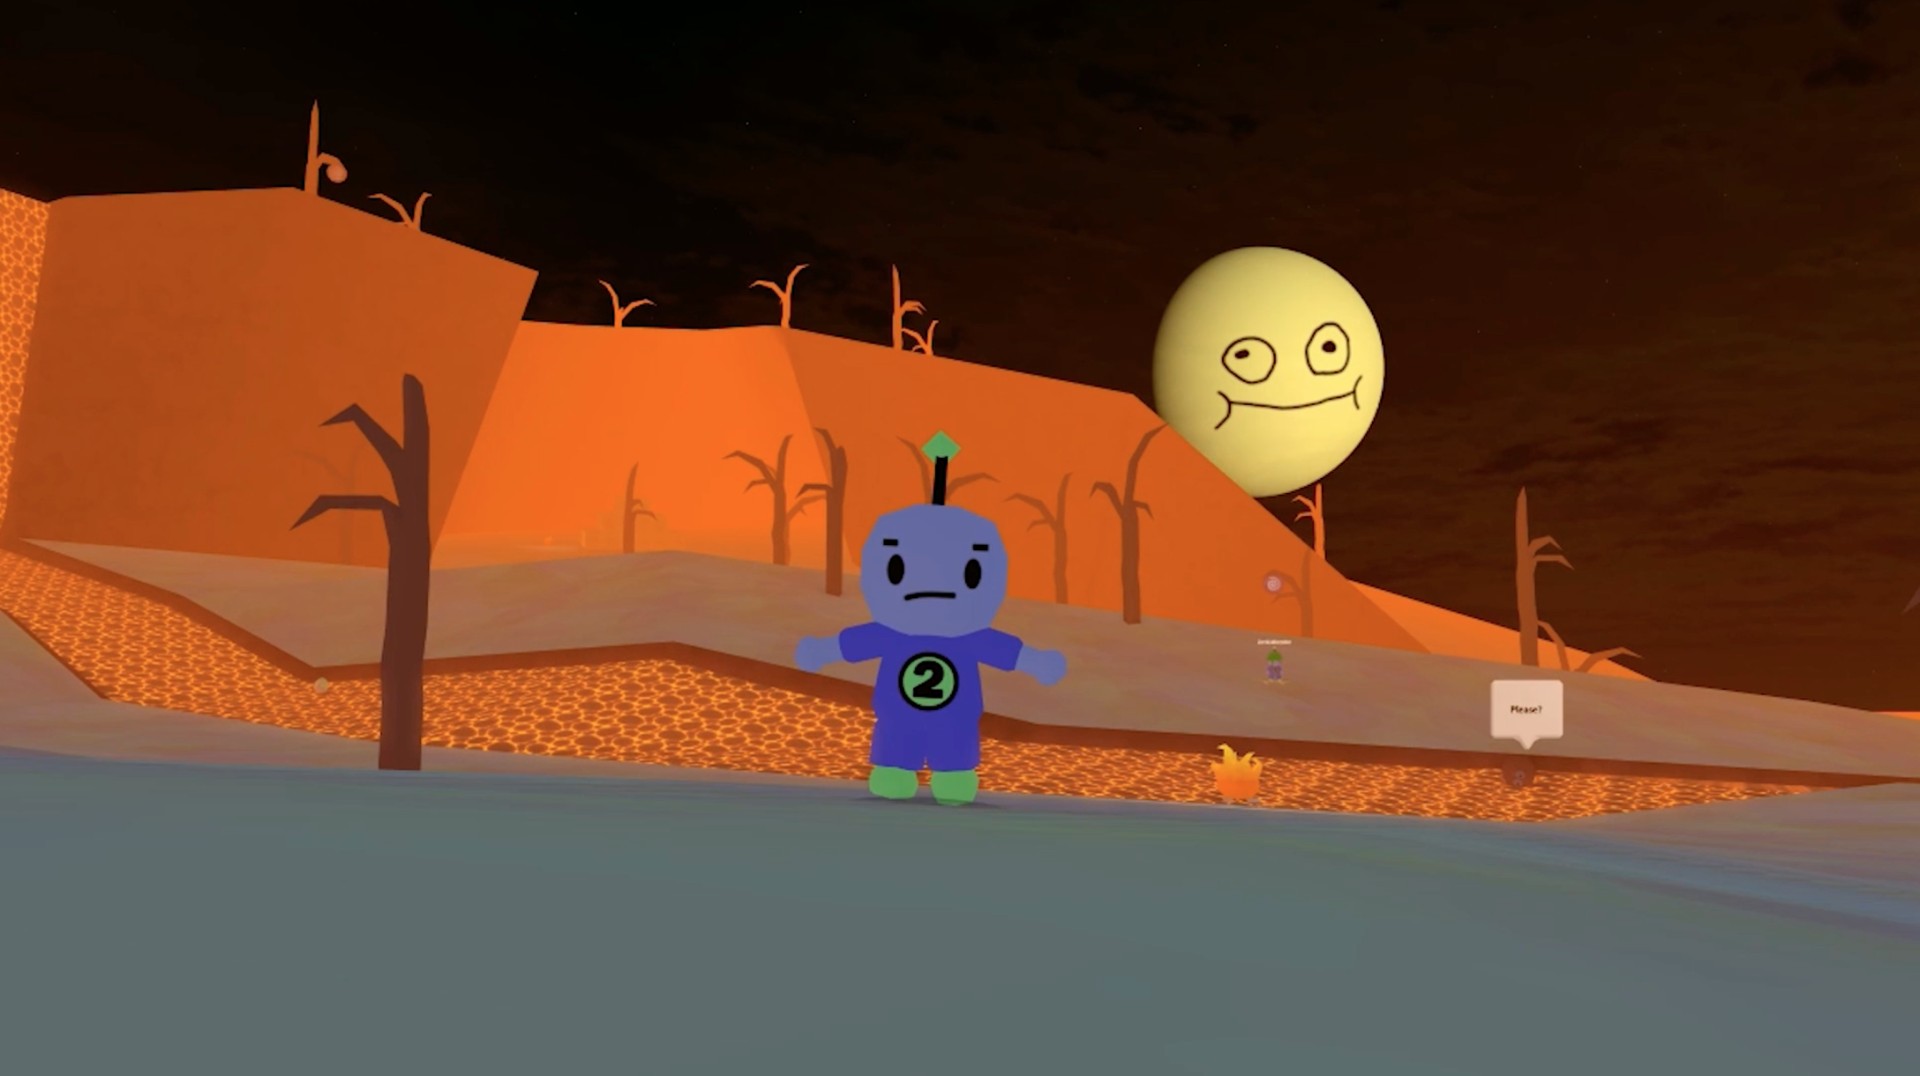 3d Platformer Robot 64 Is Now Available On Roblox For Xbox One Xbox Wire - roblox old school animation